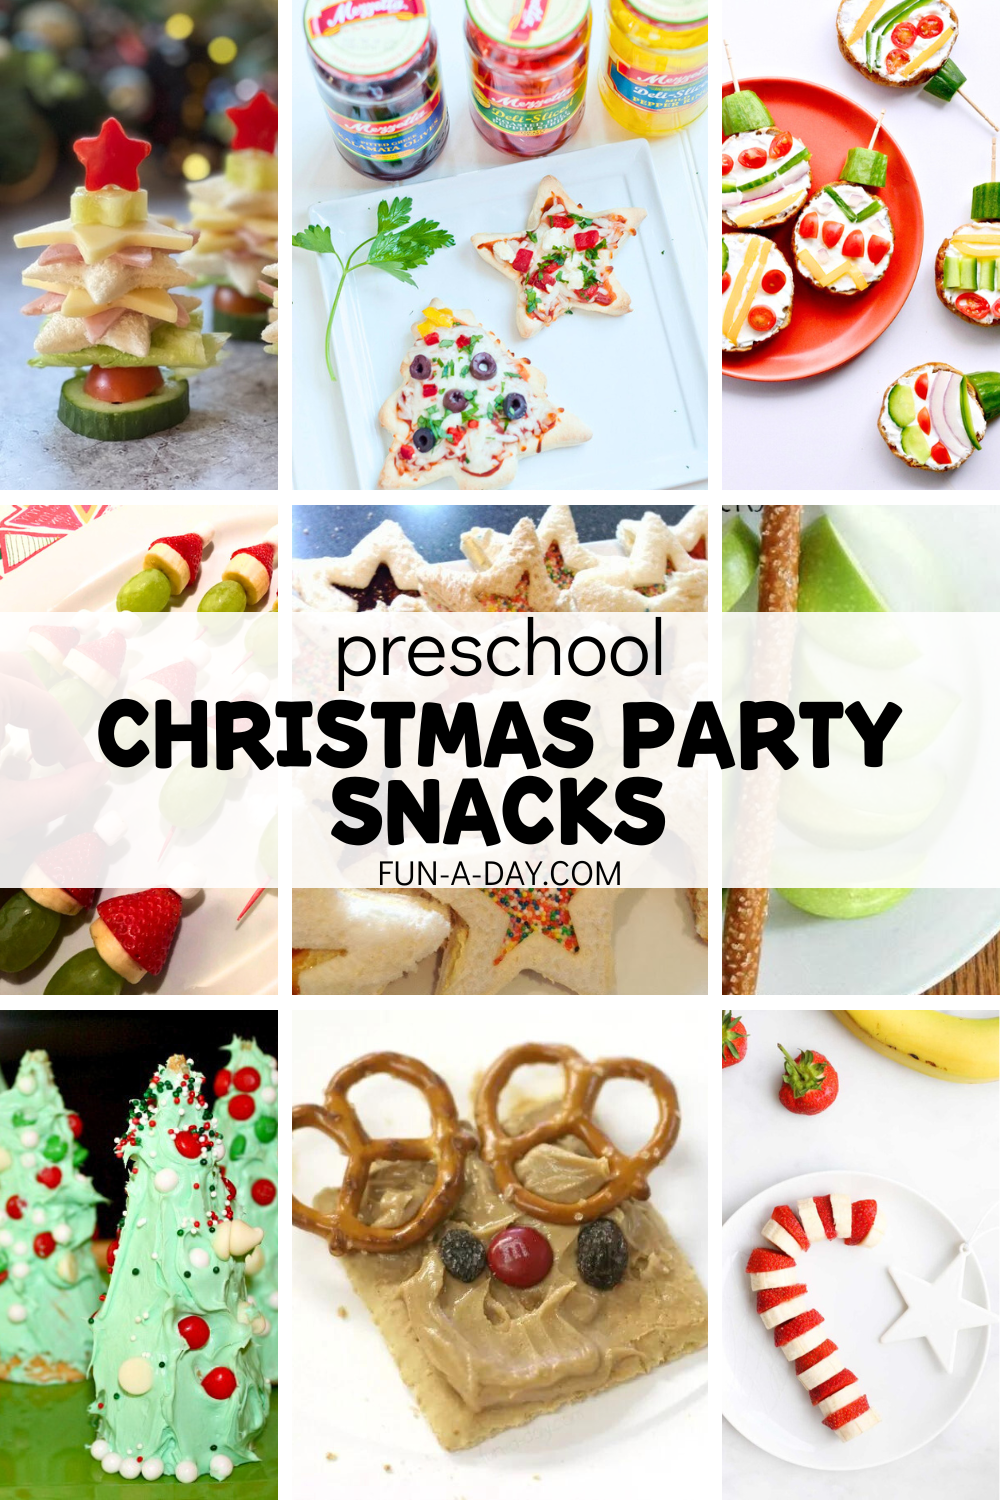 Nine Christmas snack ideas for kids with text that reads preschool Christmas party snacks.